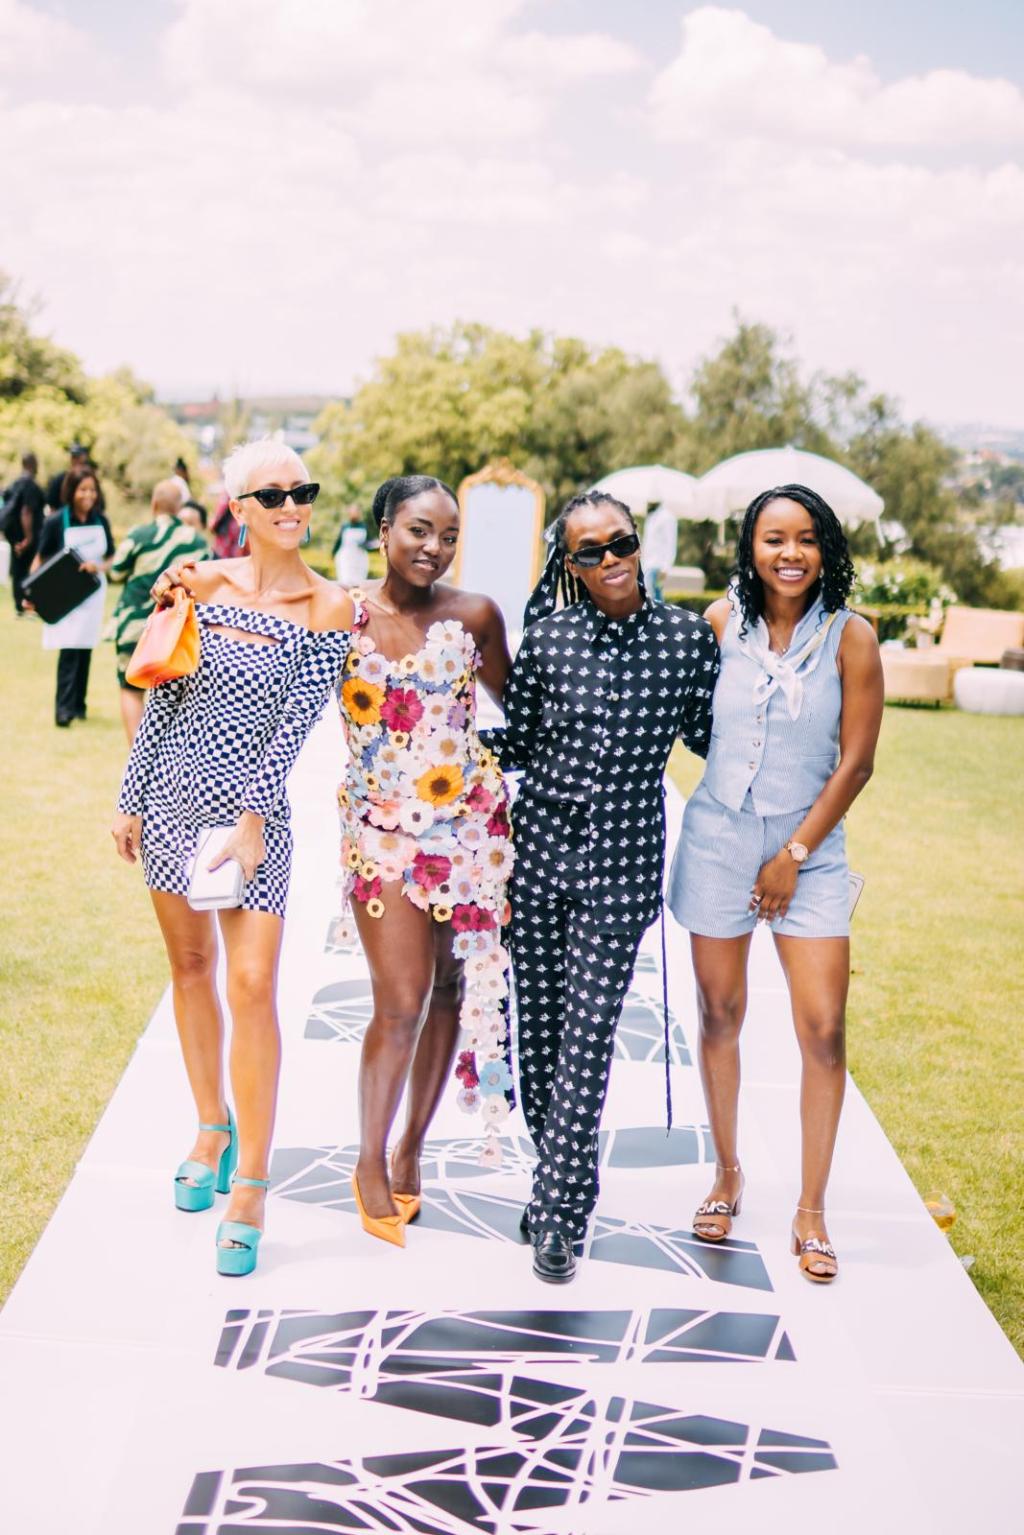 THE WARNER MUSIC LETS BRUNCH TOGETHER :A GRAND FINALE TO THE YEAR WITH MUSIC ARTISTRY AND STYLE.